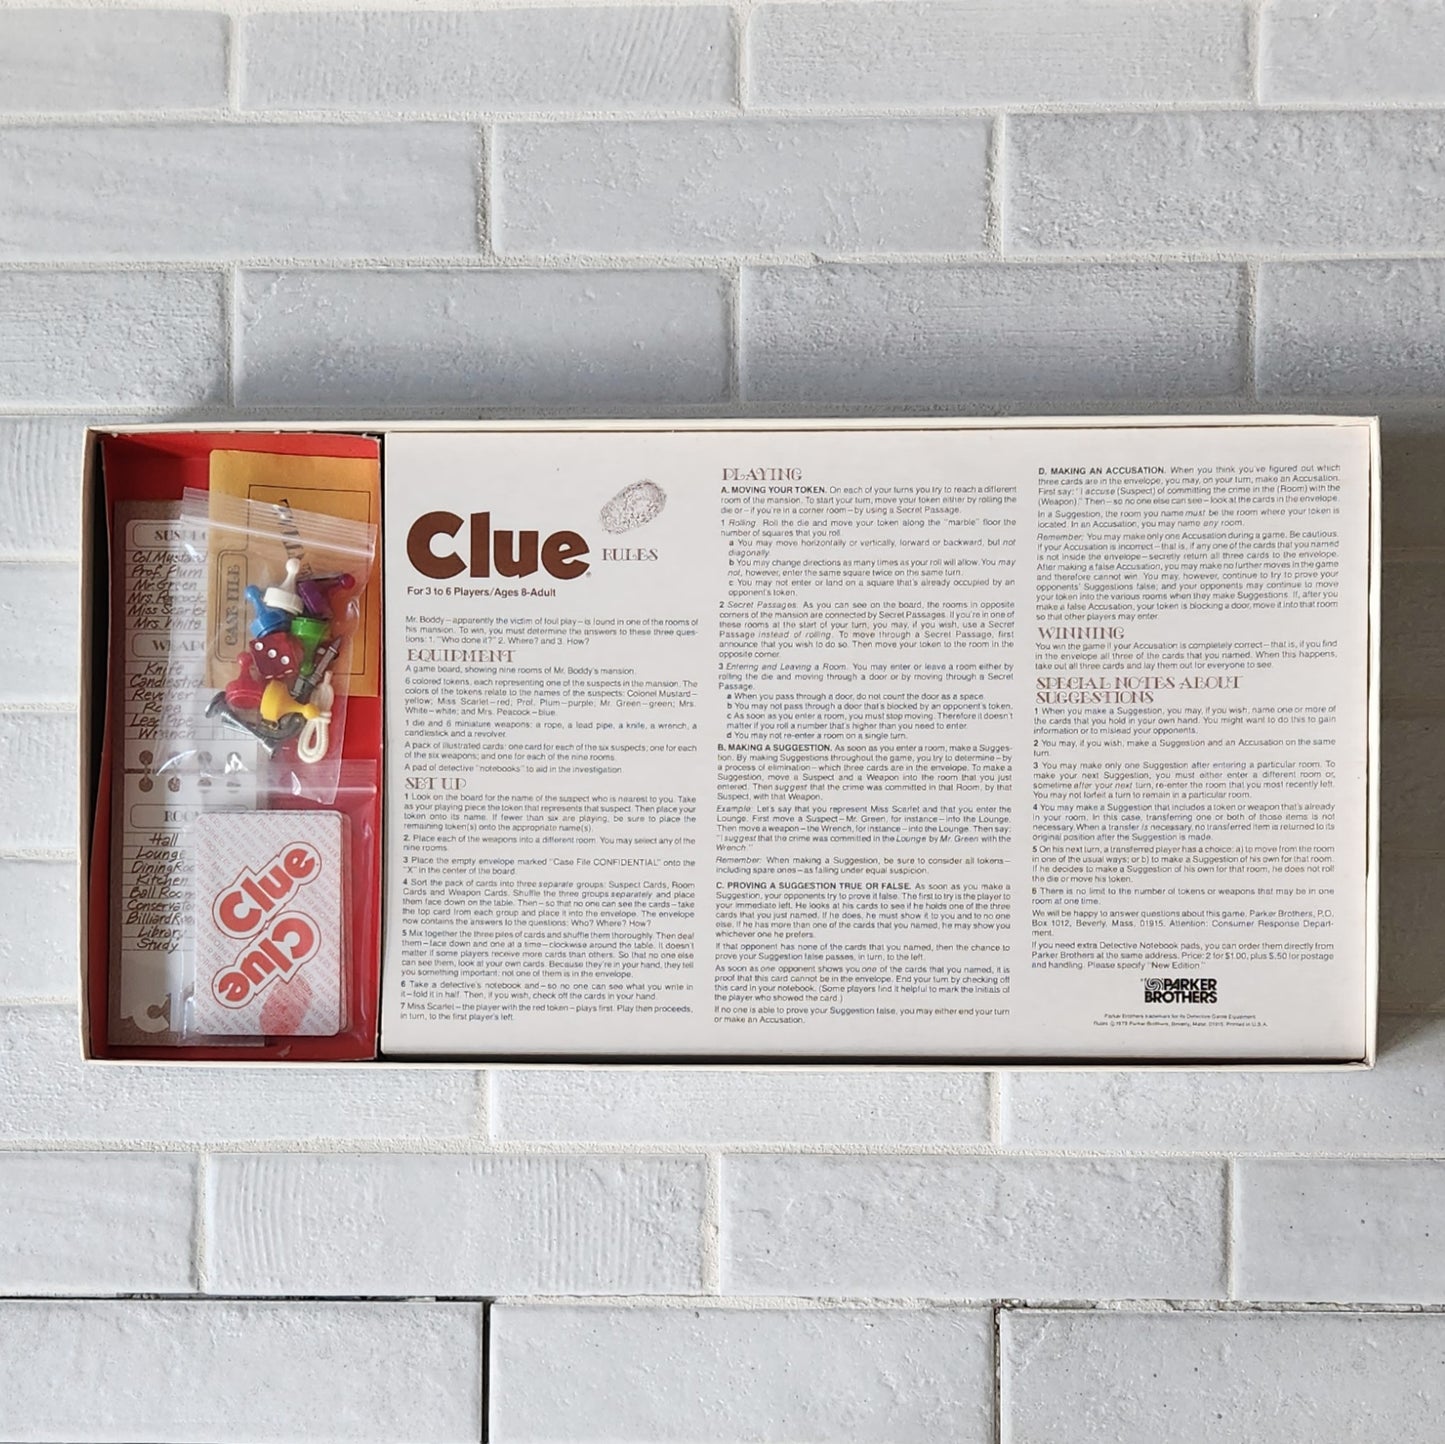 Display and Play 1979 Clue Handmade Framed Board Game